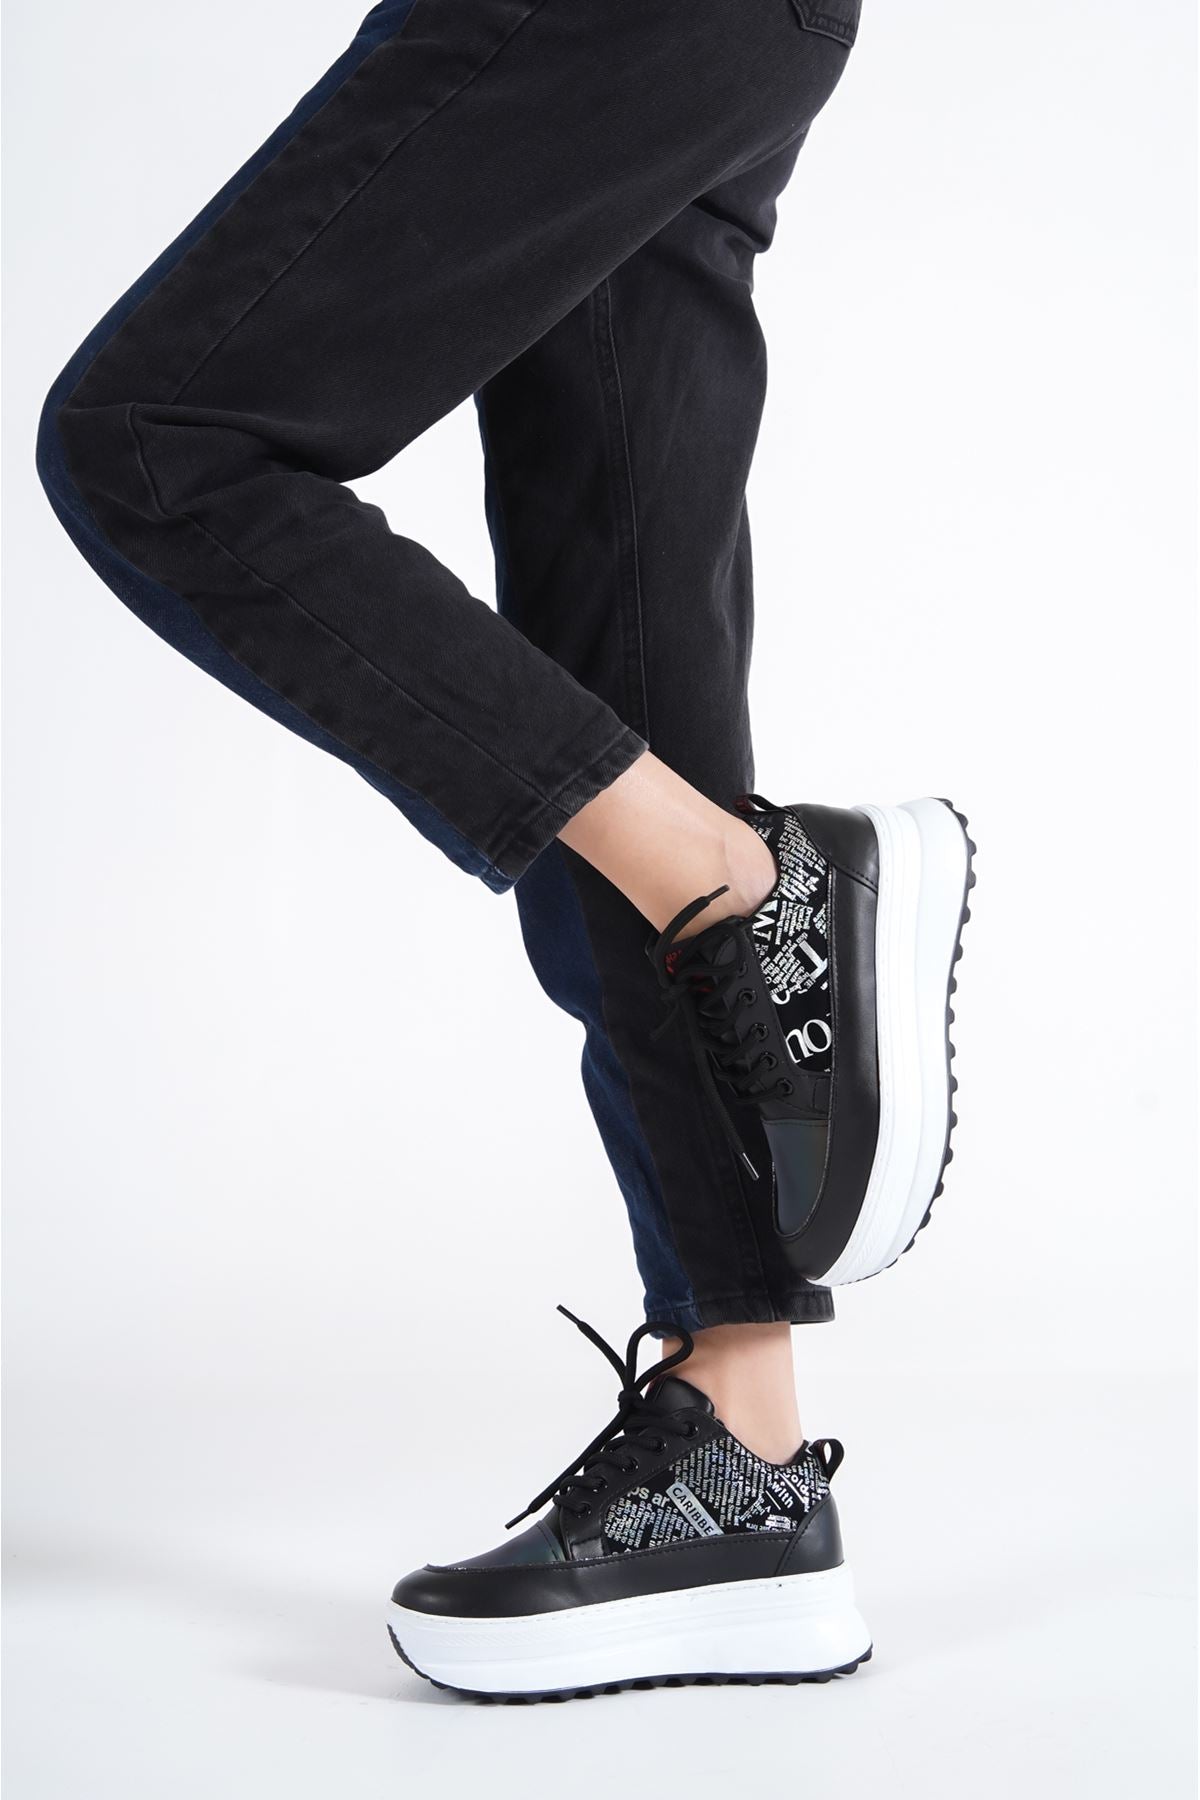 Women's ONEO black-white Sneakers Shoes - STREETMODE ™